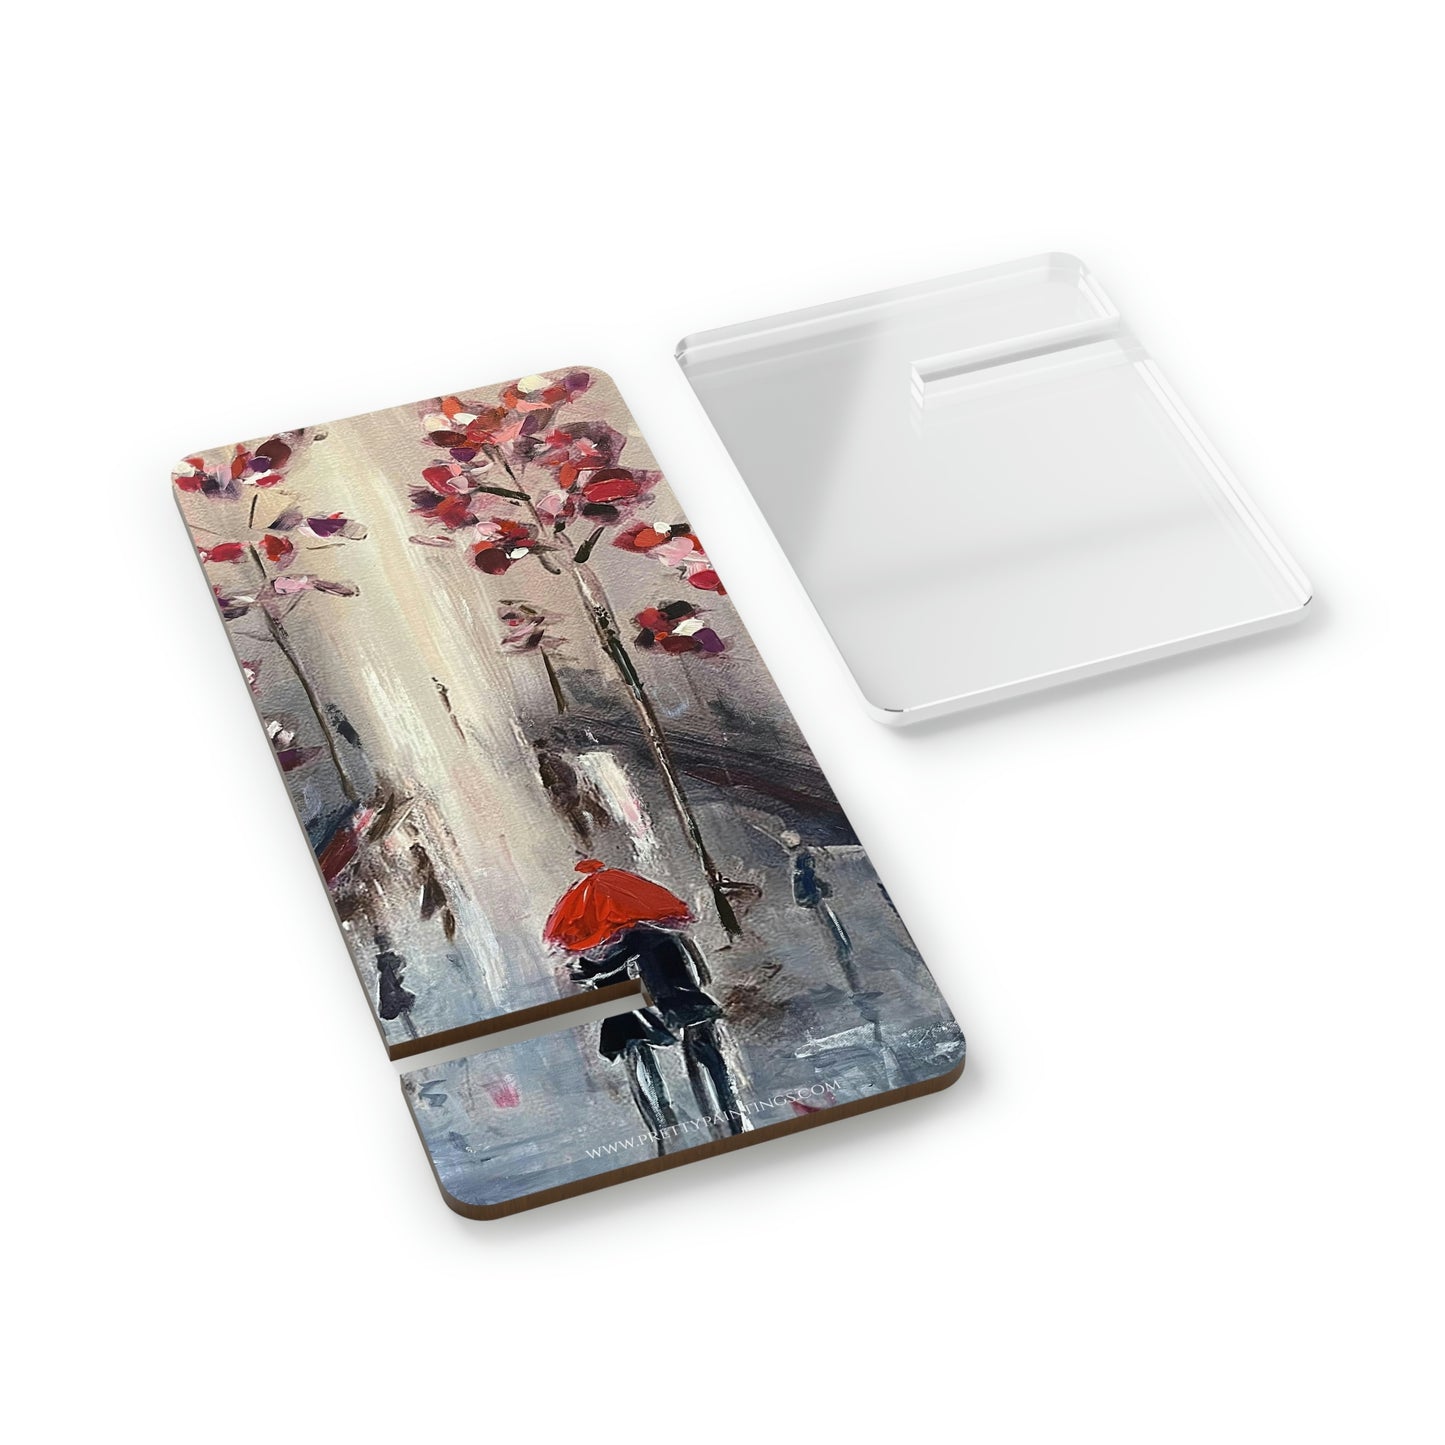 Strolling in Paris-Phone Stand